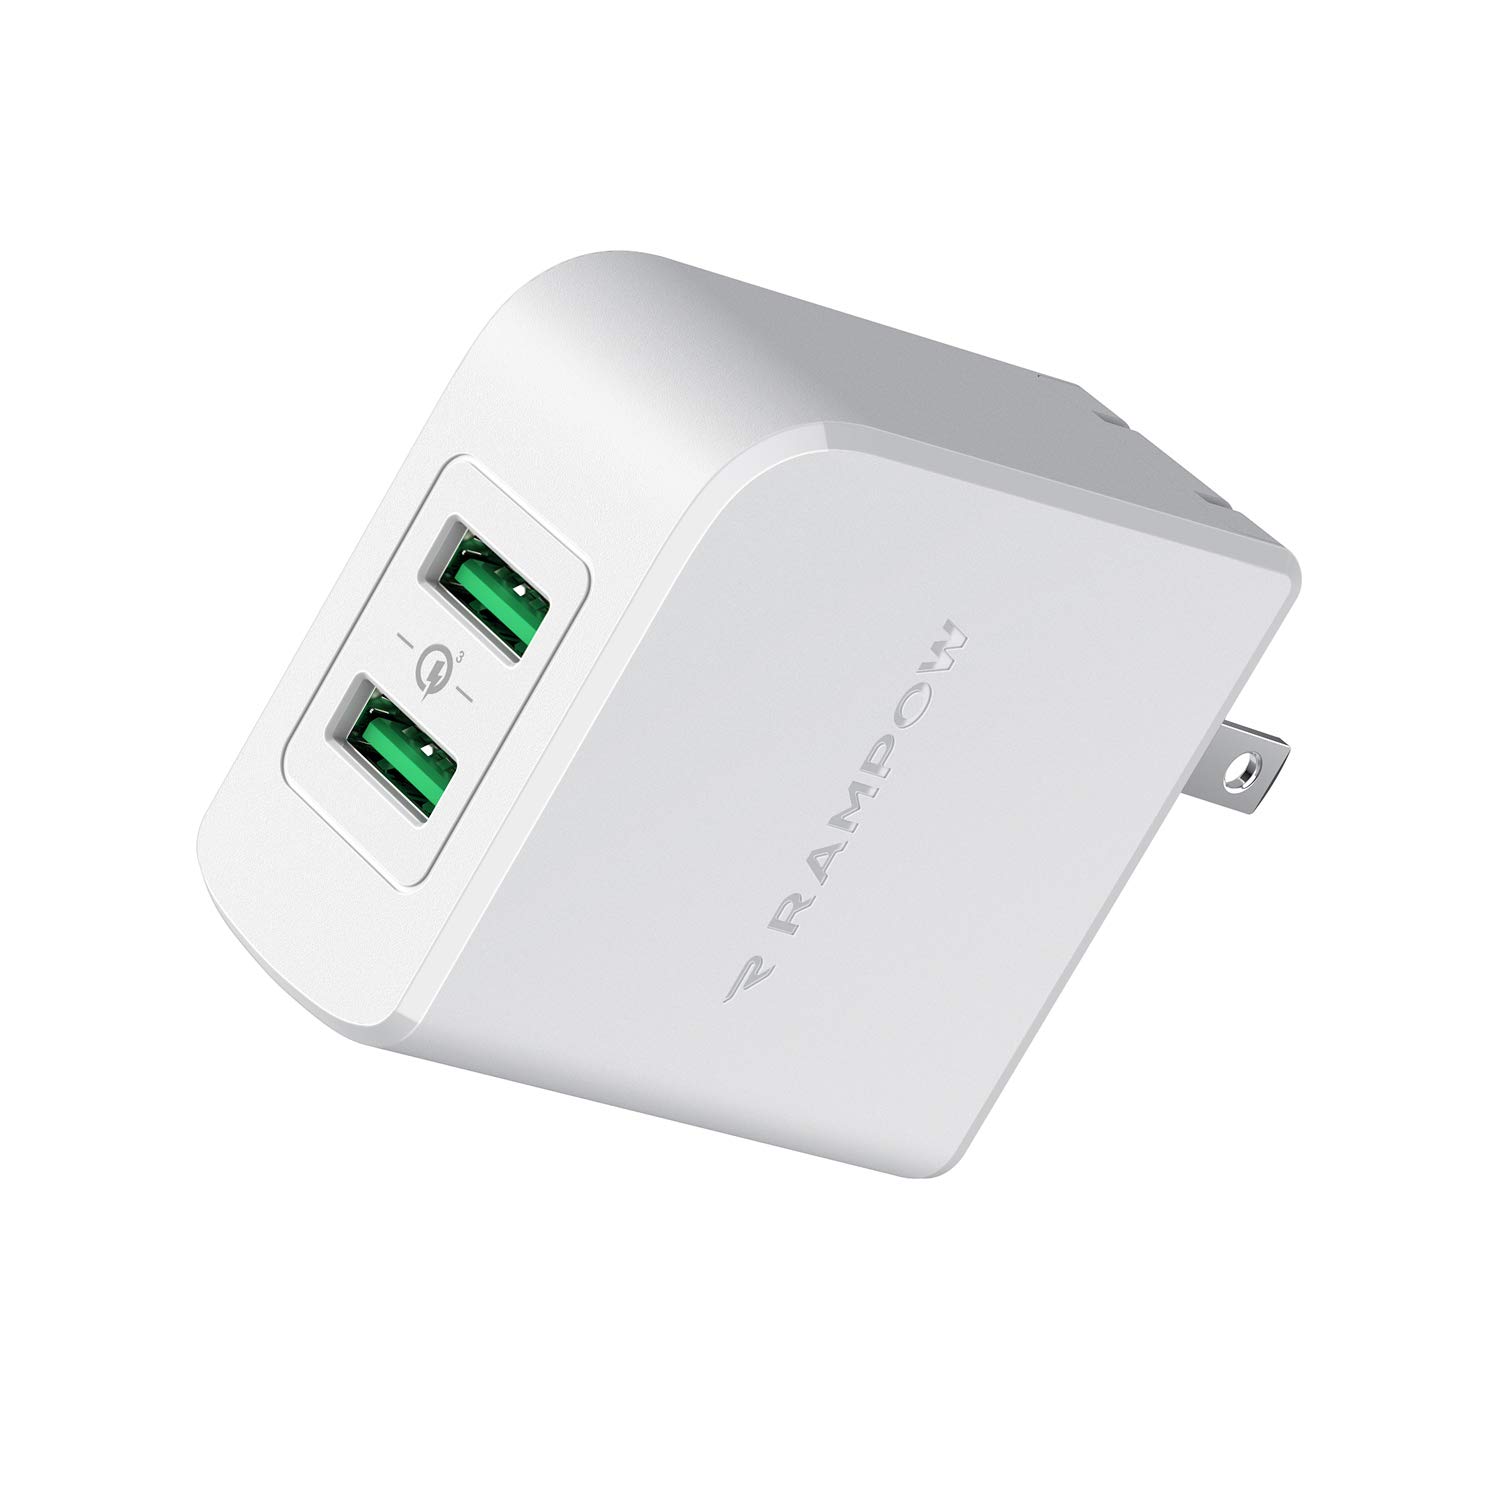 Rampow USB急速充電器 android 充電器39W/QC 3.0対応/2ポート/PSE認証済usb 充電器 折りたたみ式プラグ搭載 iPhone/iPad/Galaxy S9/ Xperia XZ1 その他Android各種対応 充電アダプター iphone 充電器 海外旅行(ホワイト)